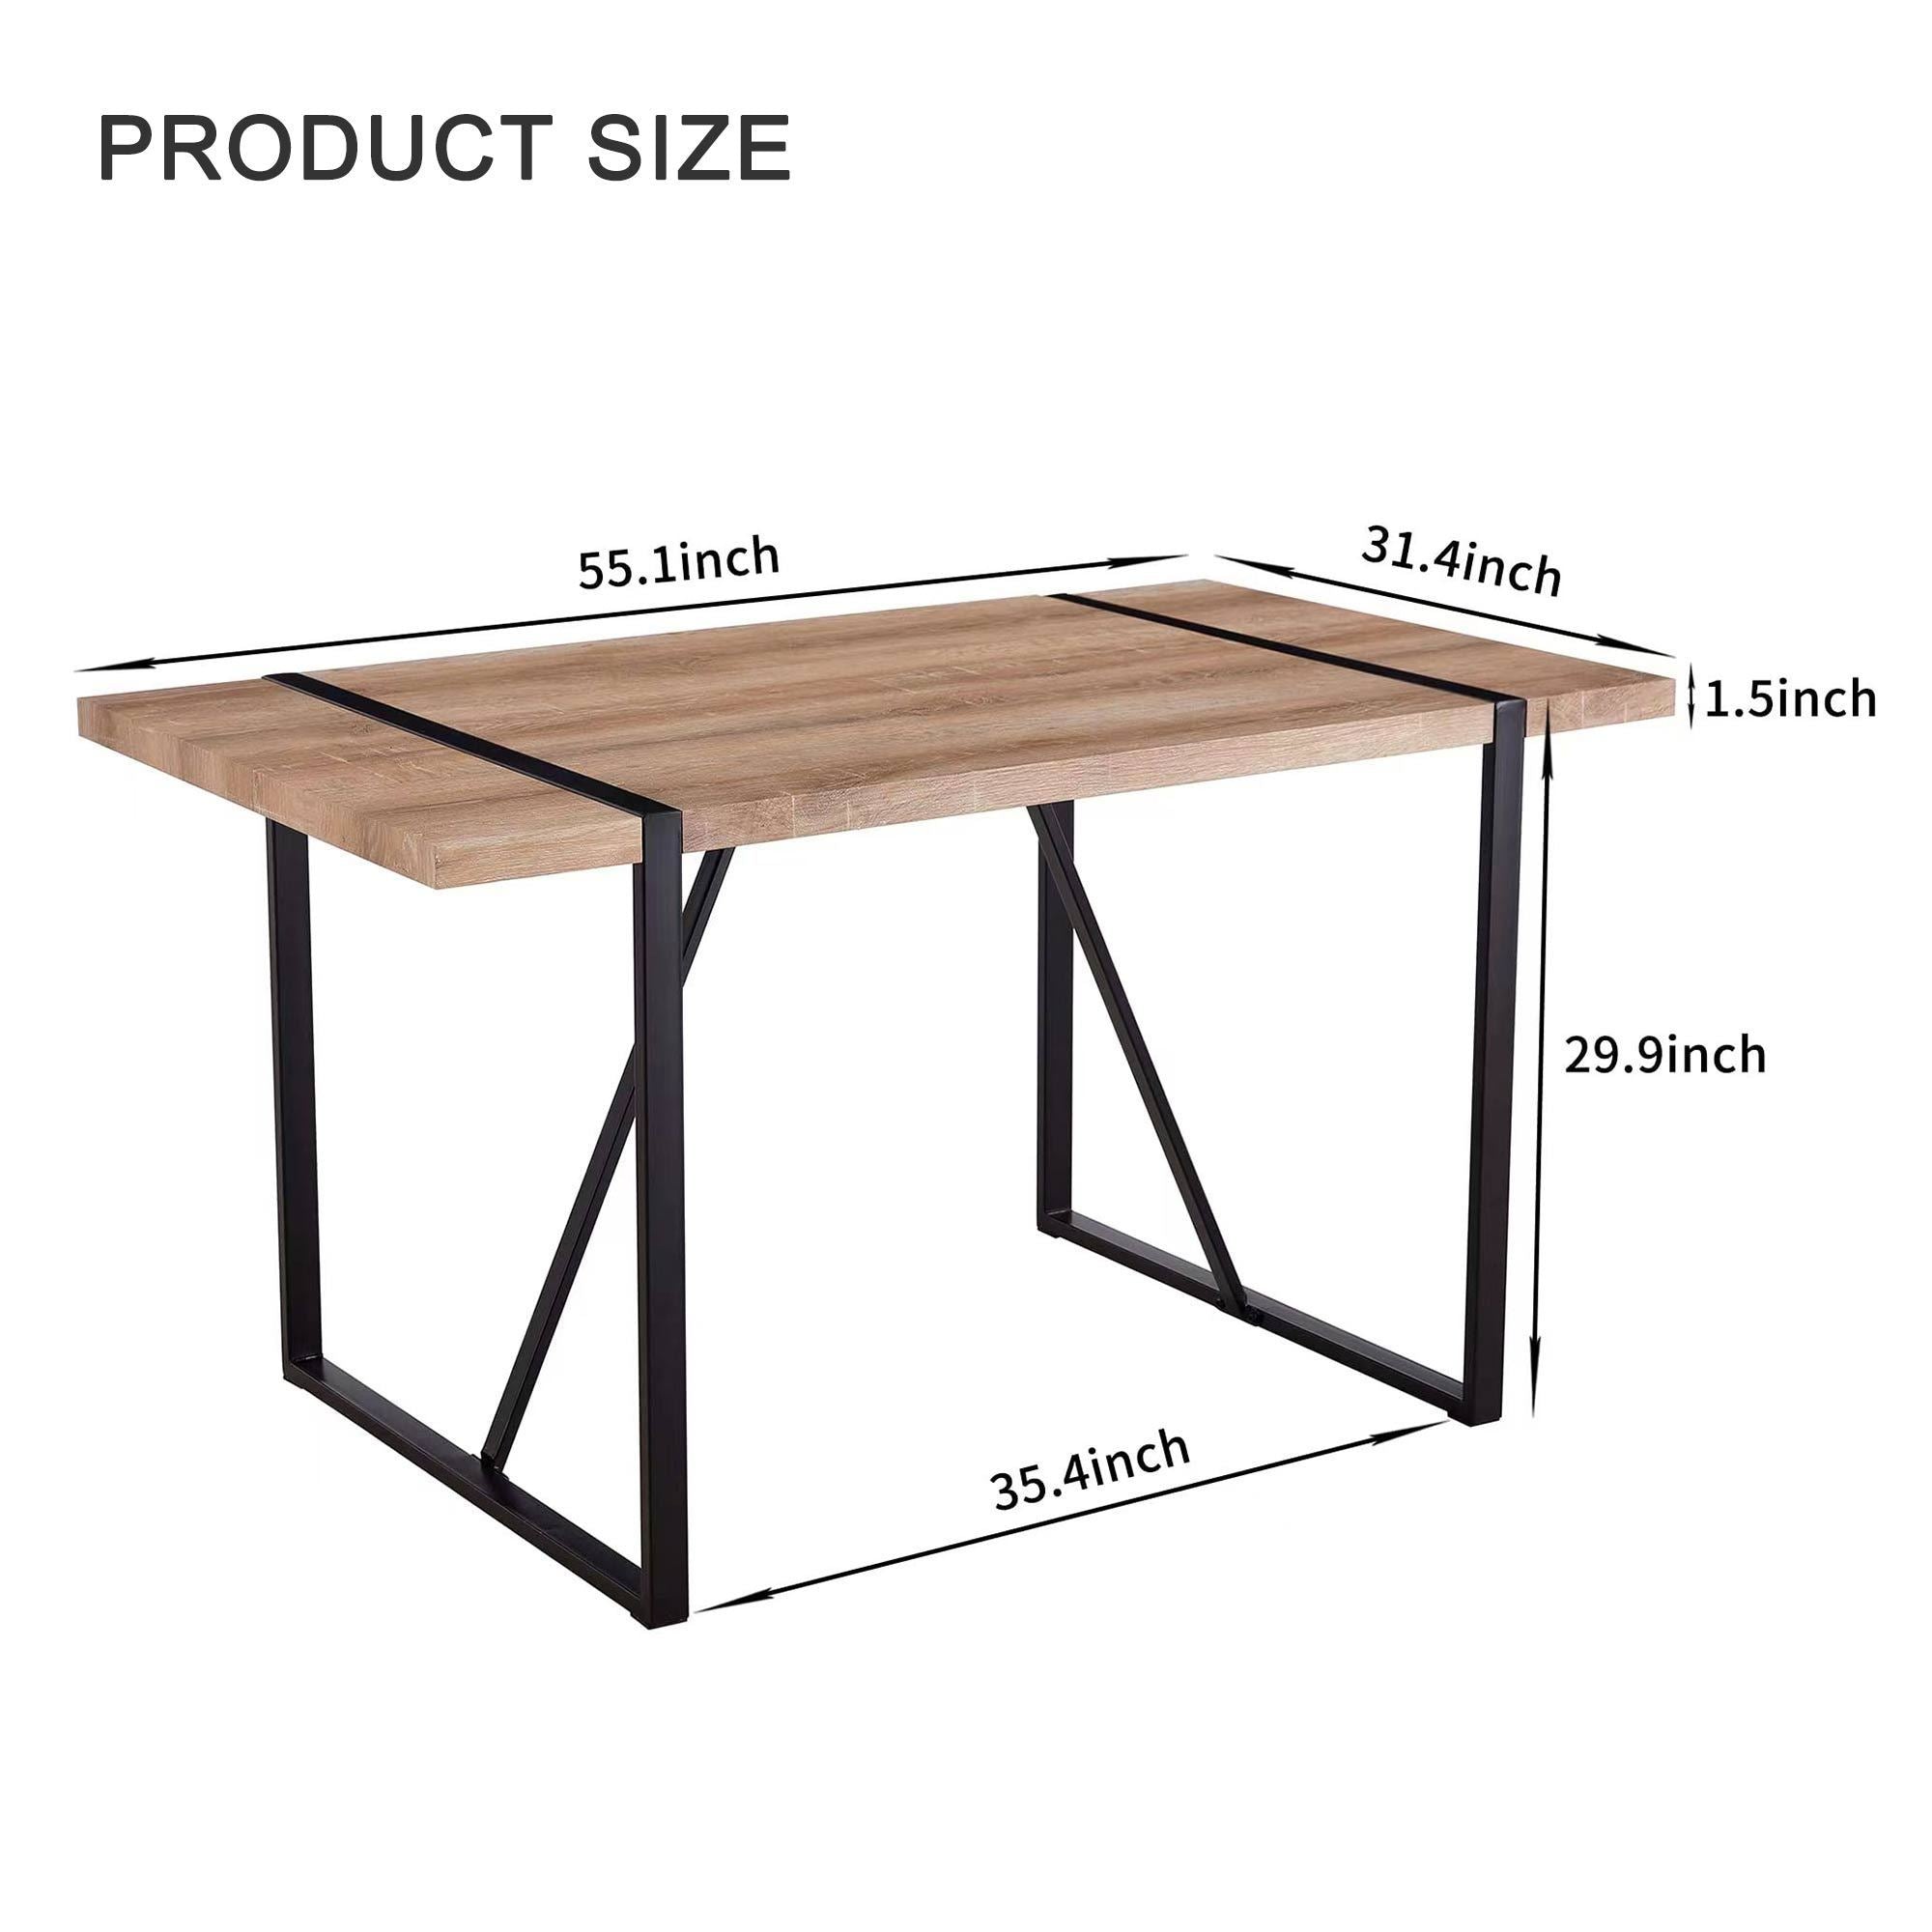 Rustic Industrial Rectangular Wood Dining Table For 4-6 Person, With 1.5" Thick Engineered Wood Tabletop and Black Metal Legs - Rustic Brown